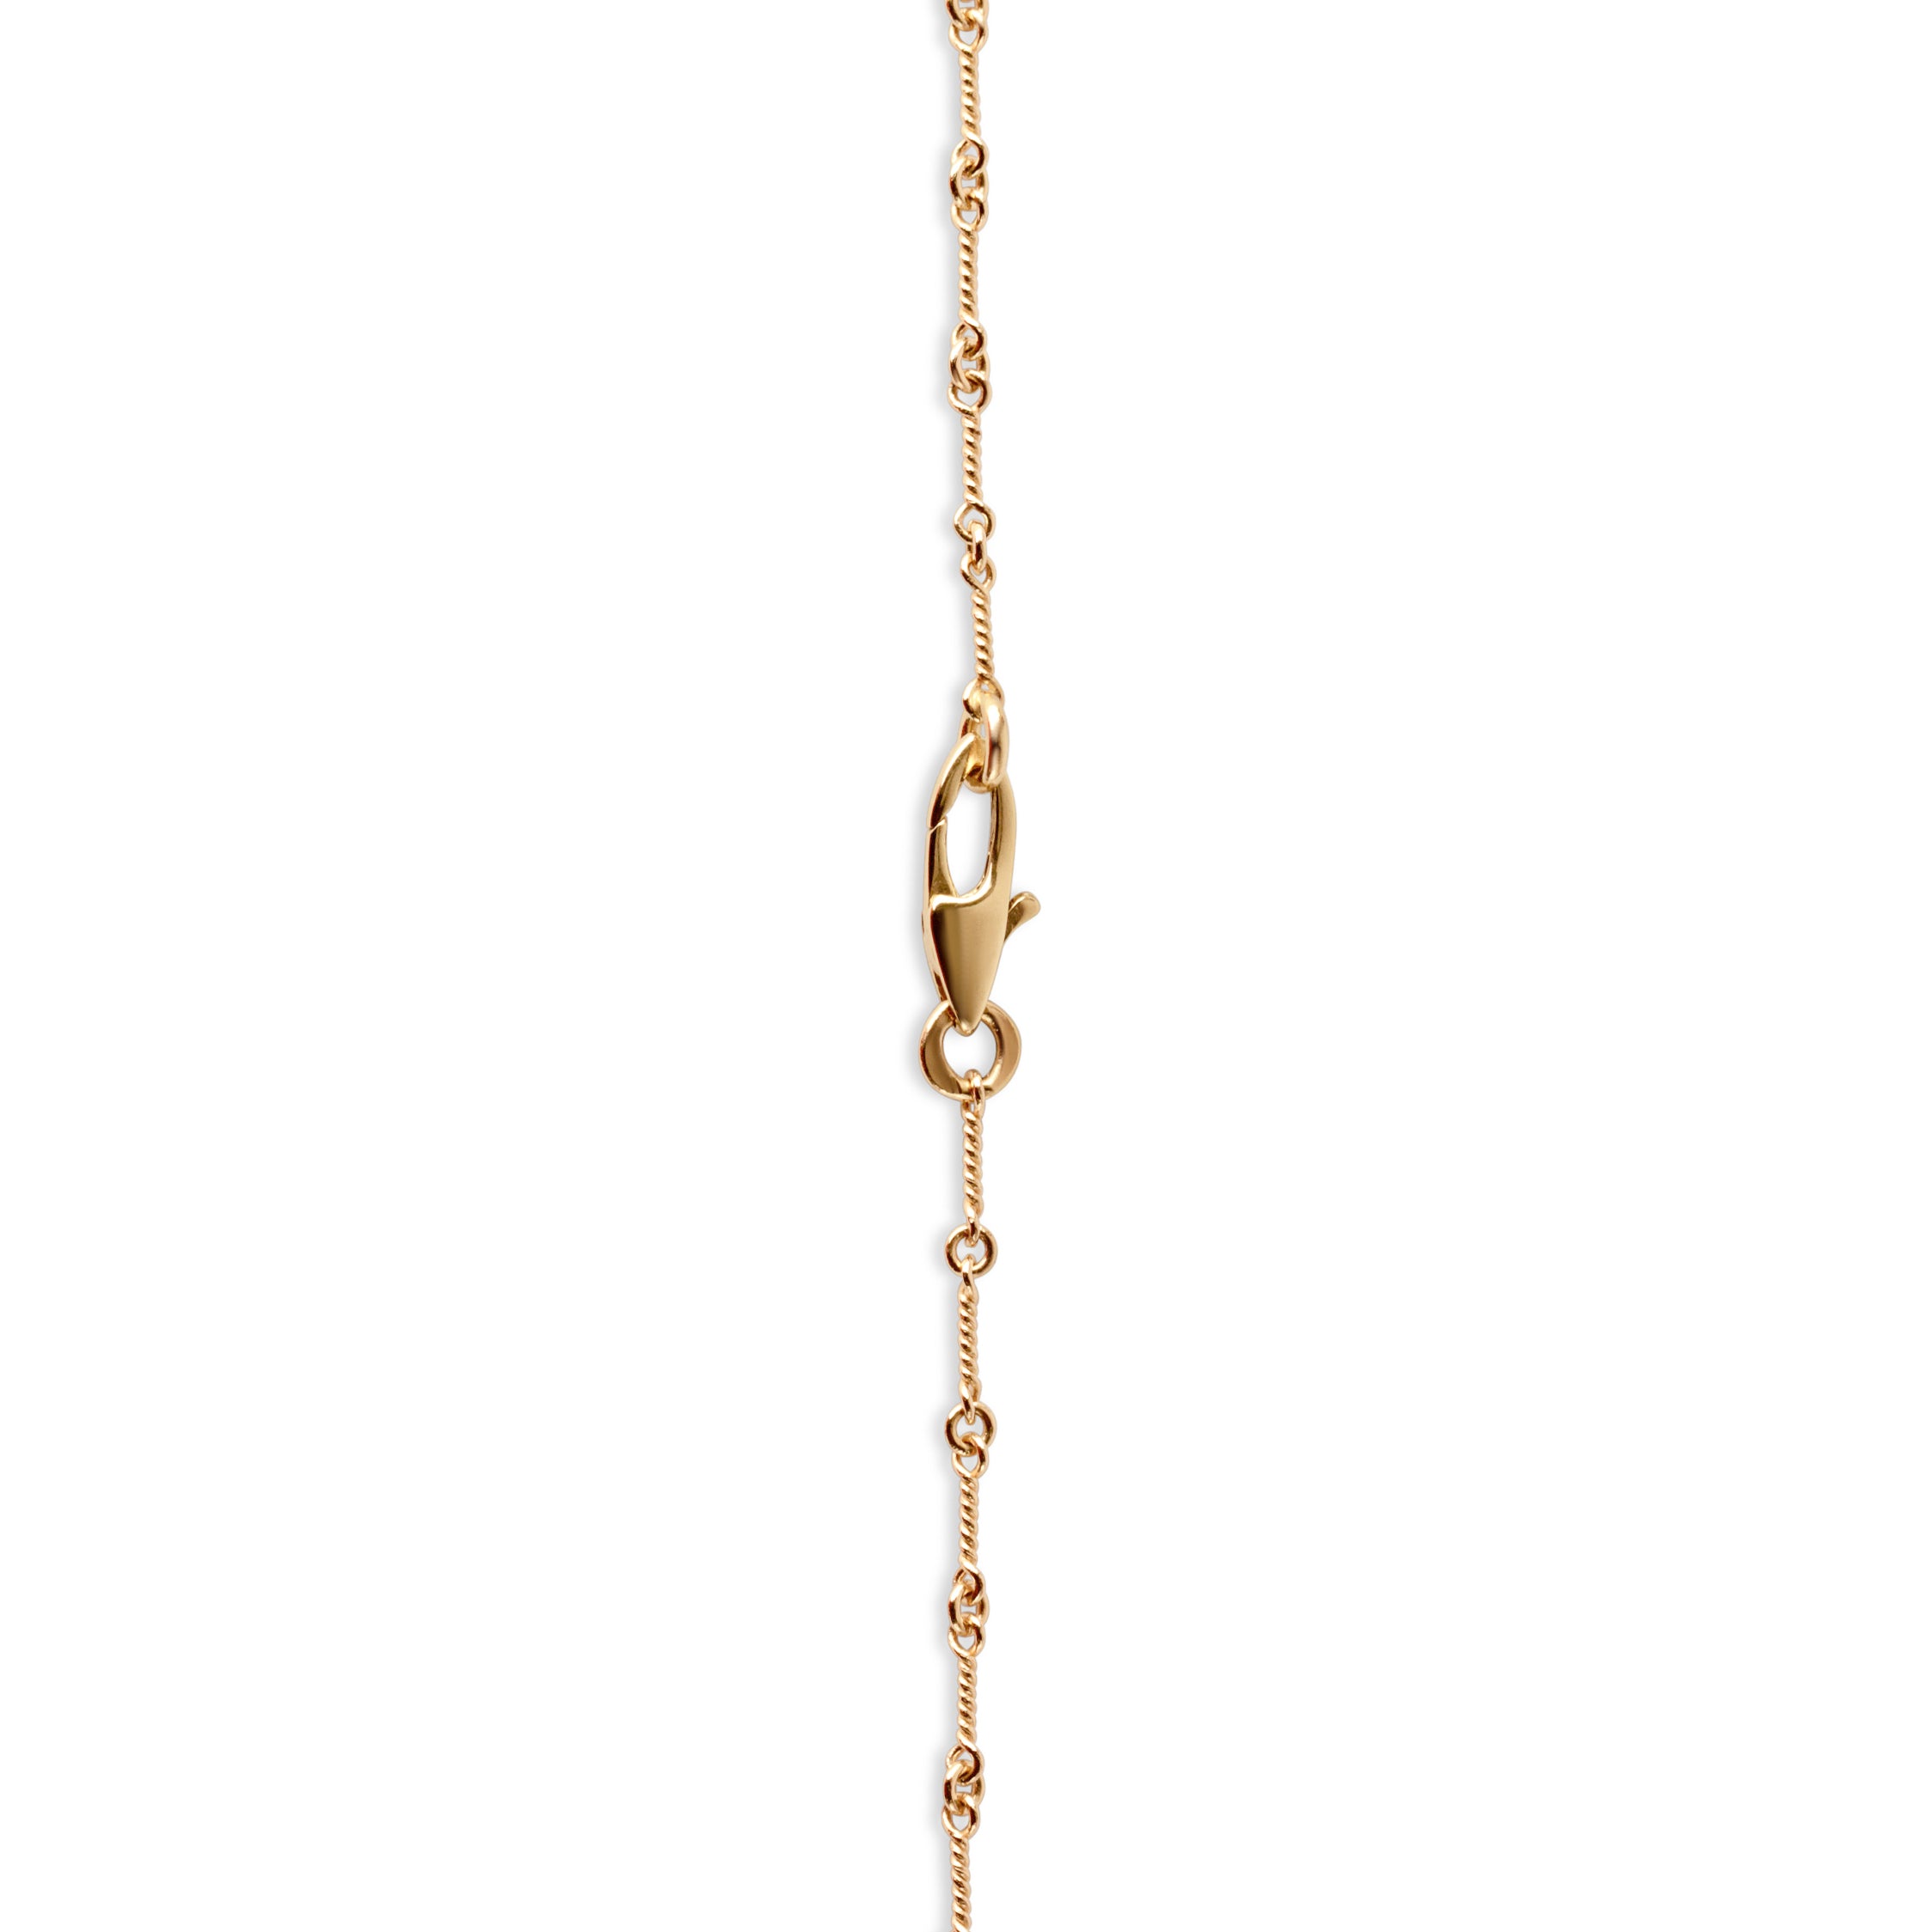 Handcrafted gold chain custom lobster clasp